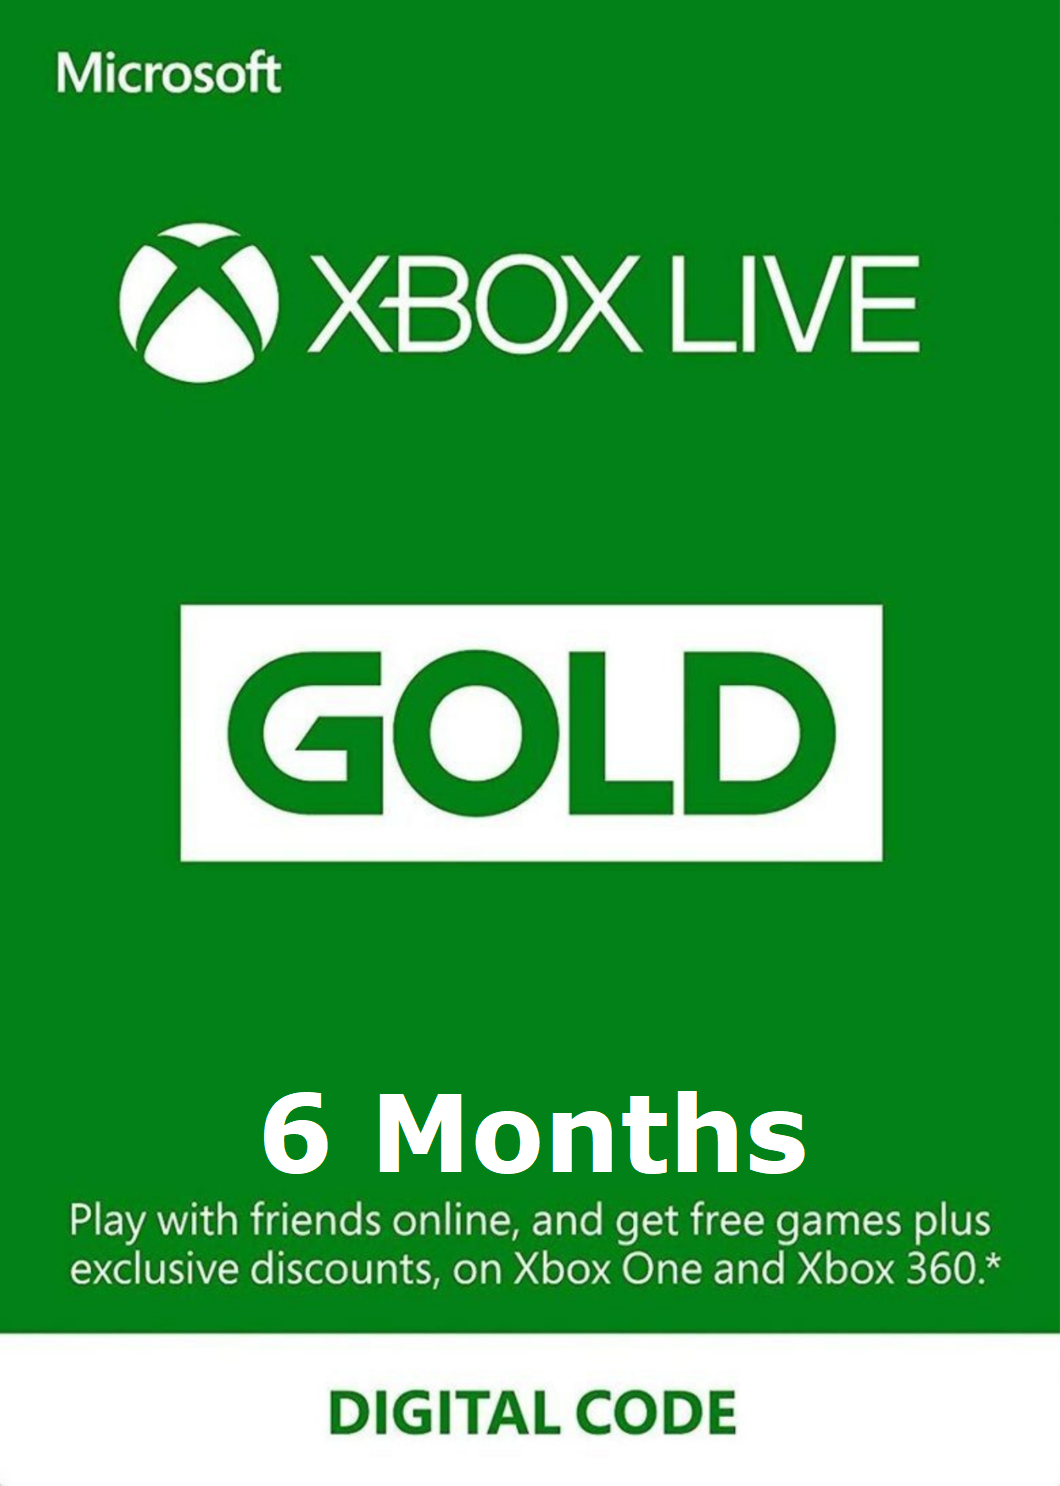 Xbox Live Gold - 6 Months